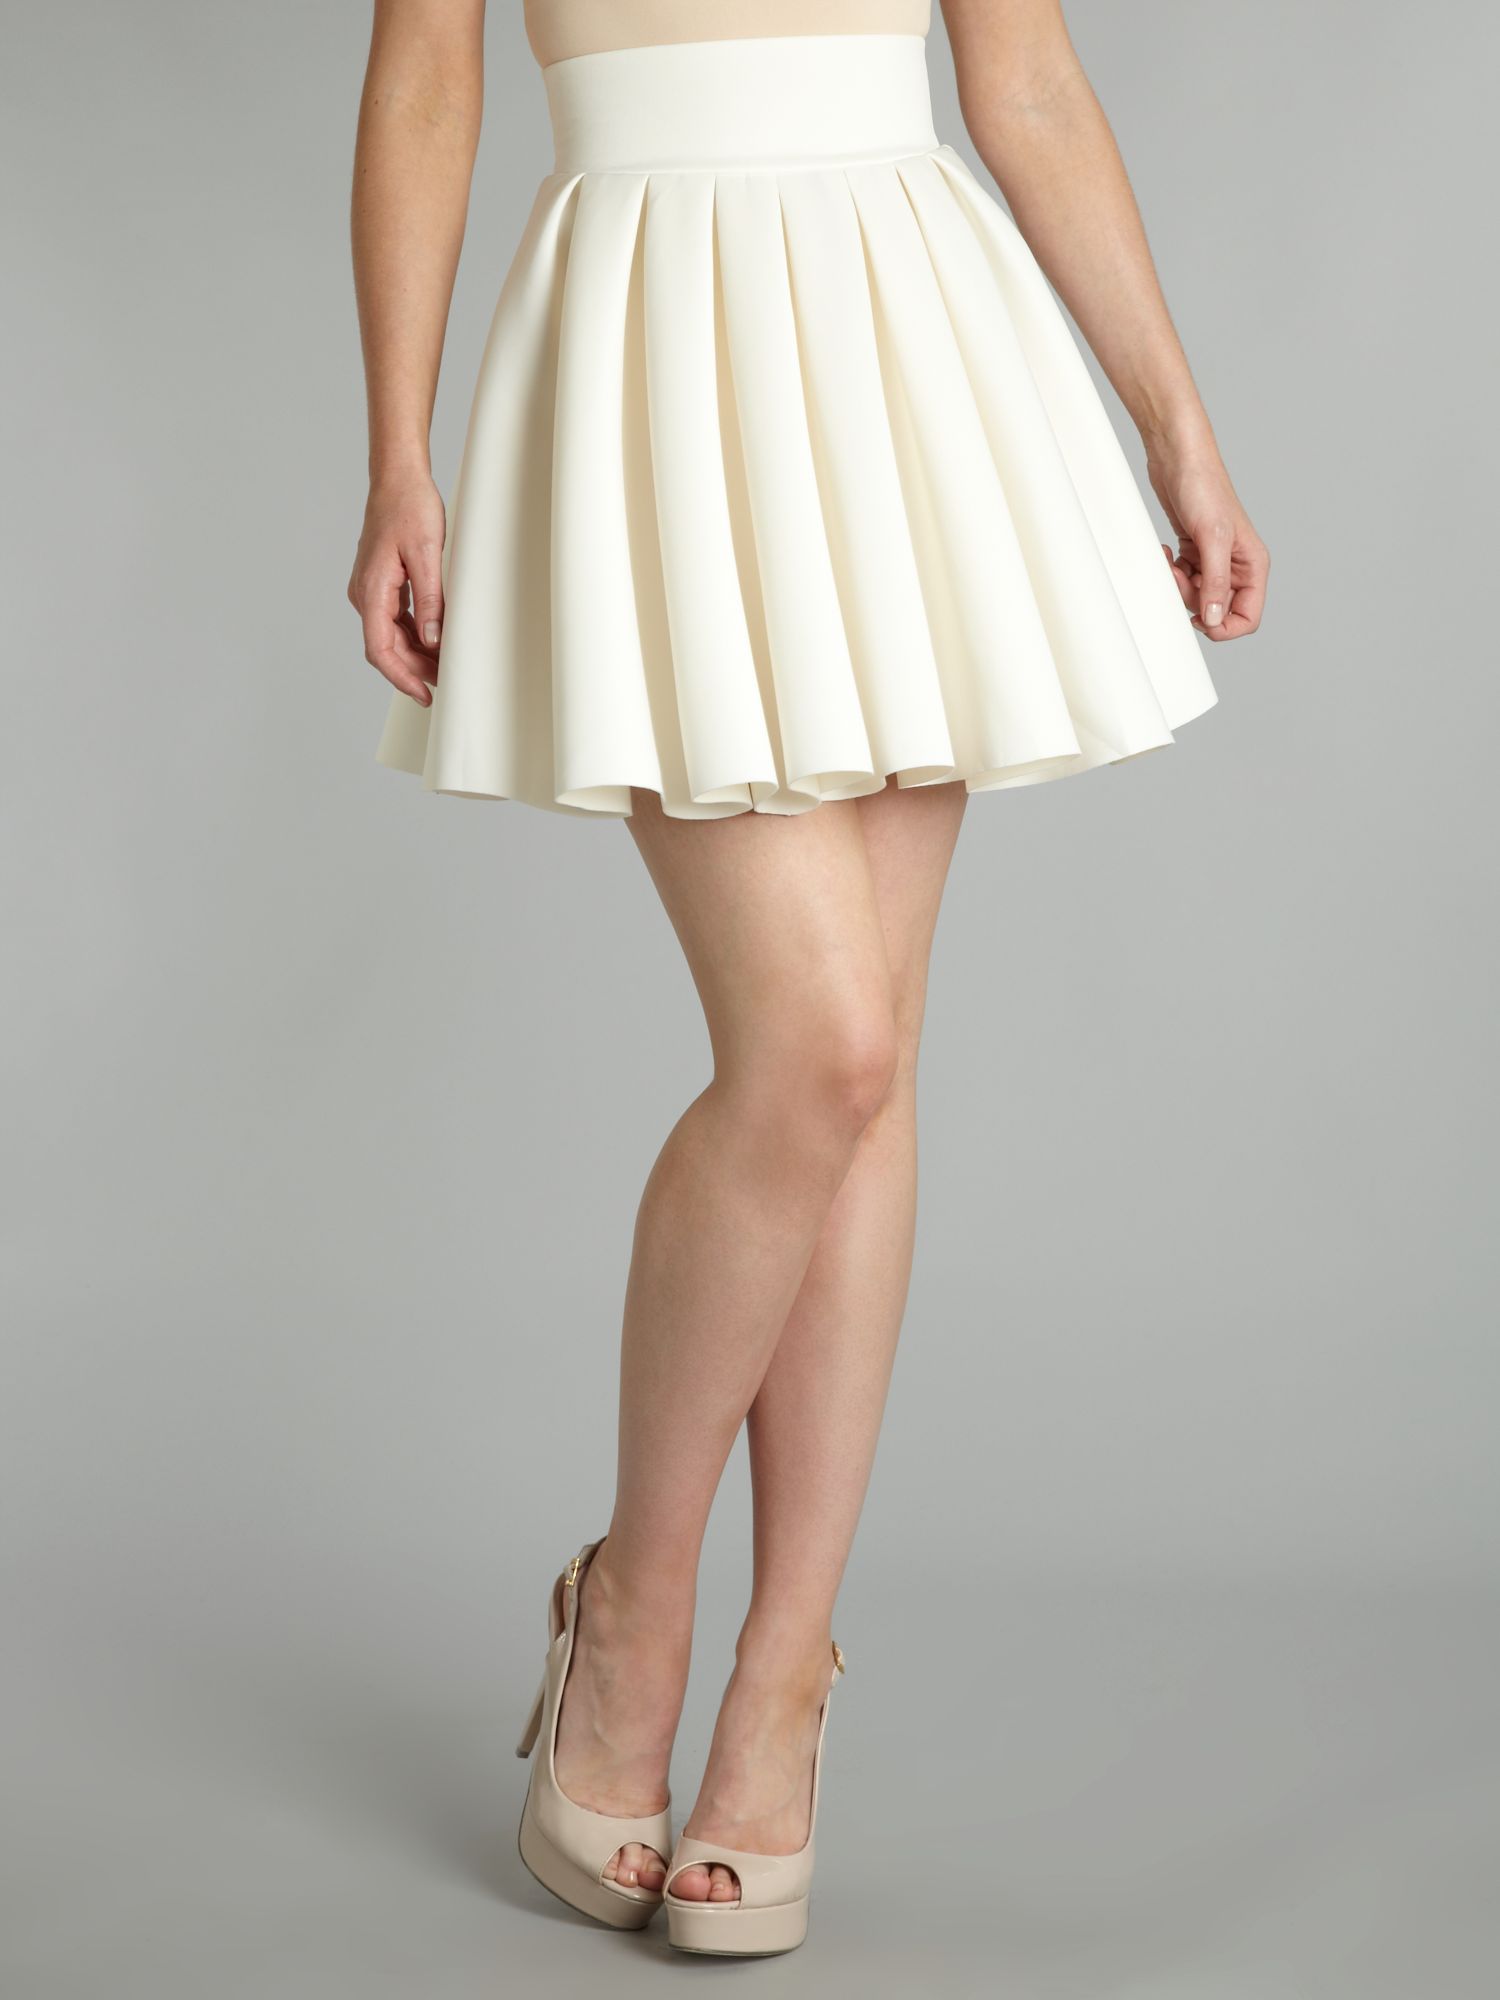 Tfnc london Flared Skirt in Natural | Lyst